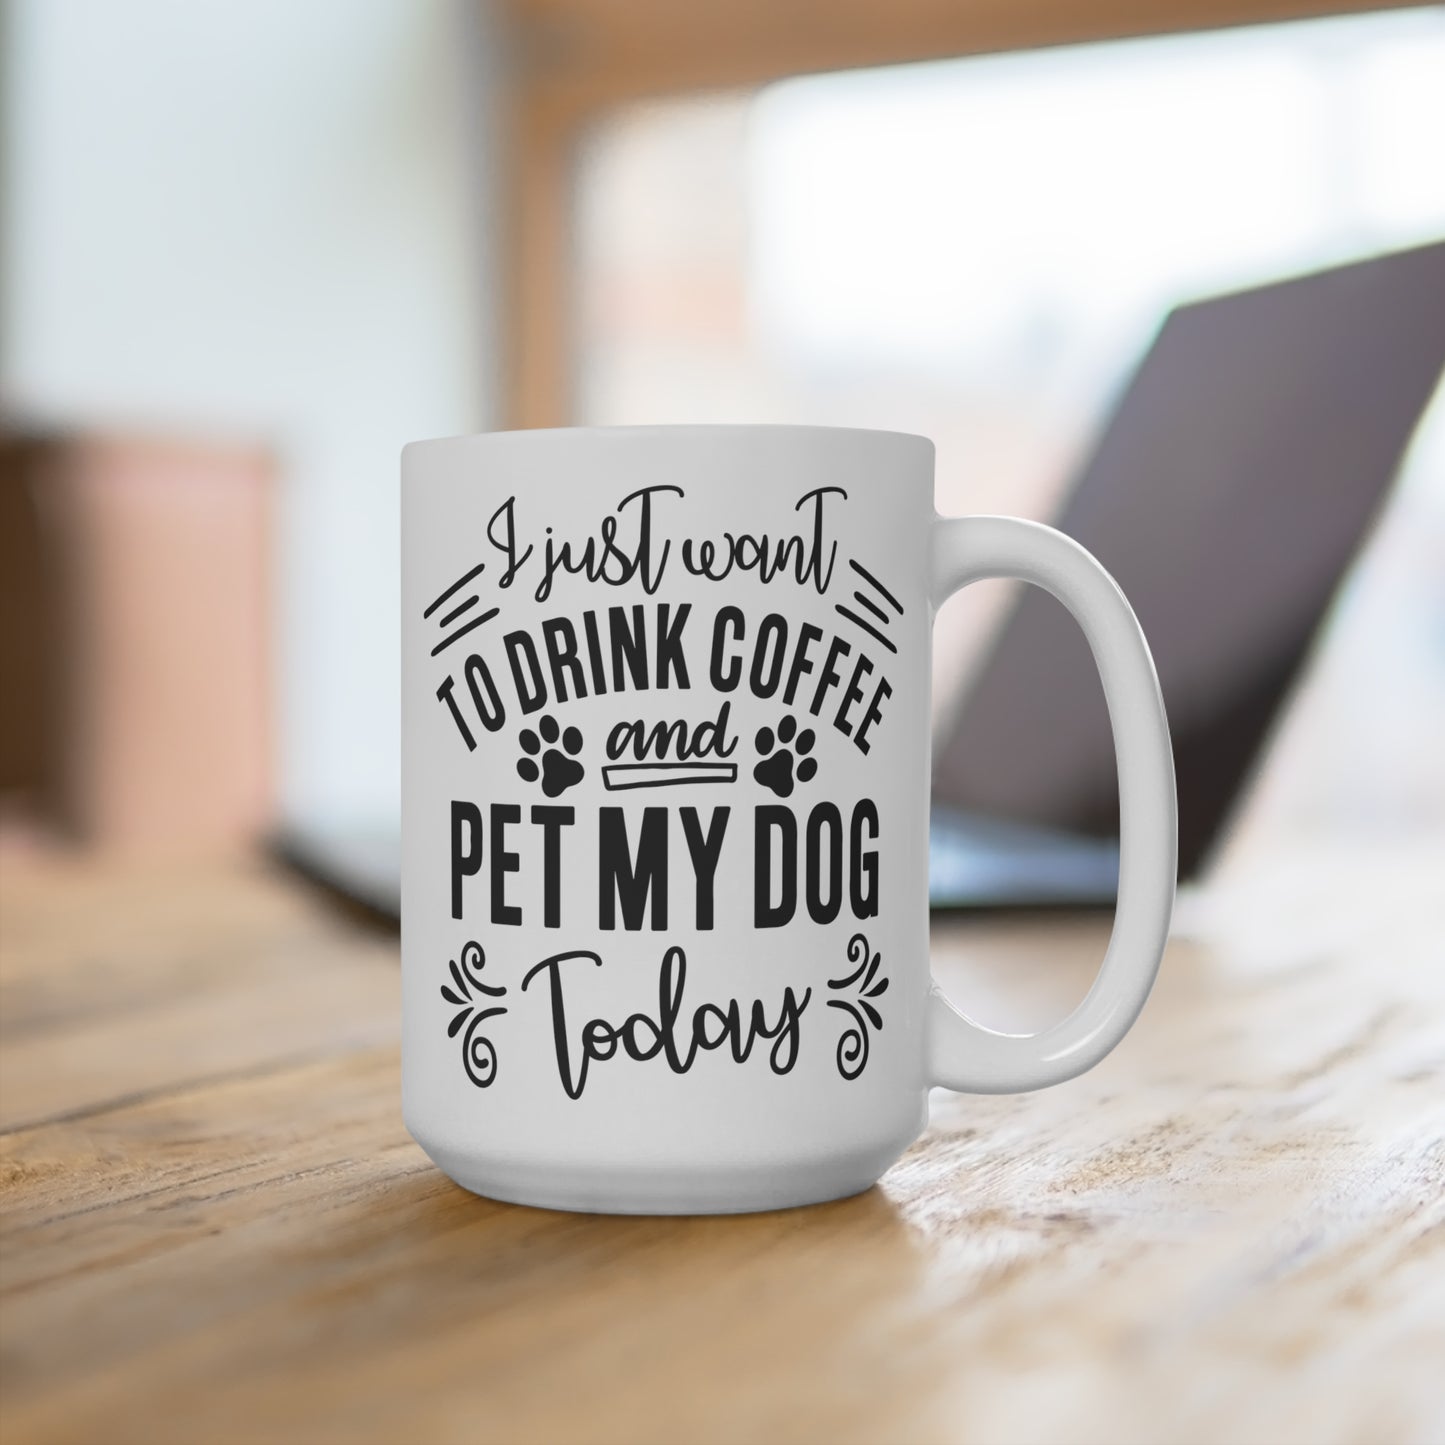 Dog Lover Coffee Mug, I Just Want To Drink Coffee And Pet My Dog Quote, Pet Owner Gift, Cute Canine Cup, Dog Paw Print Design